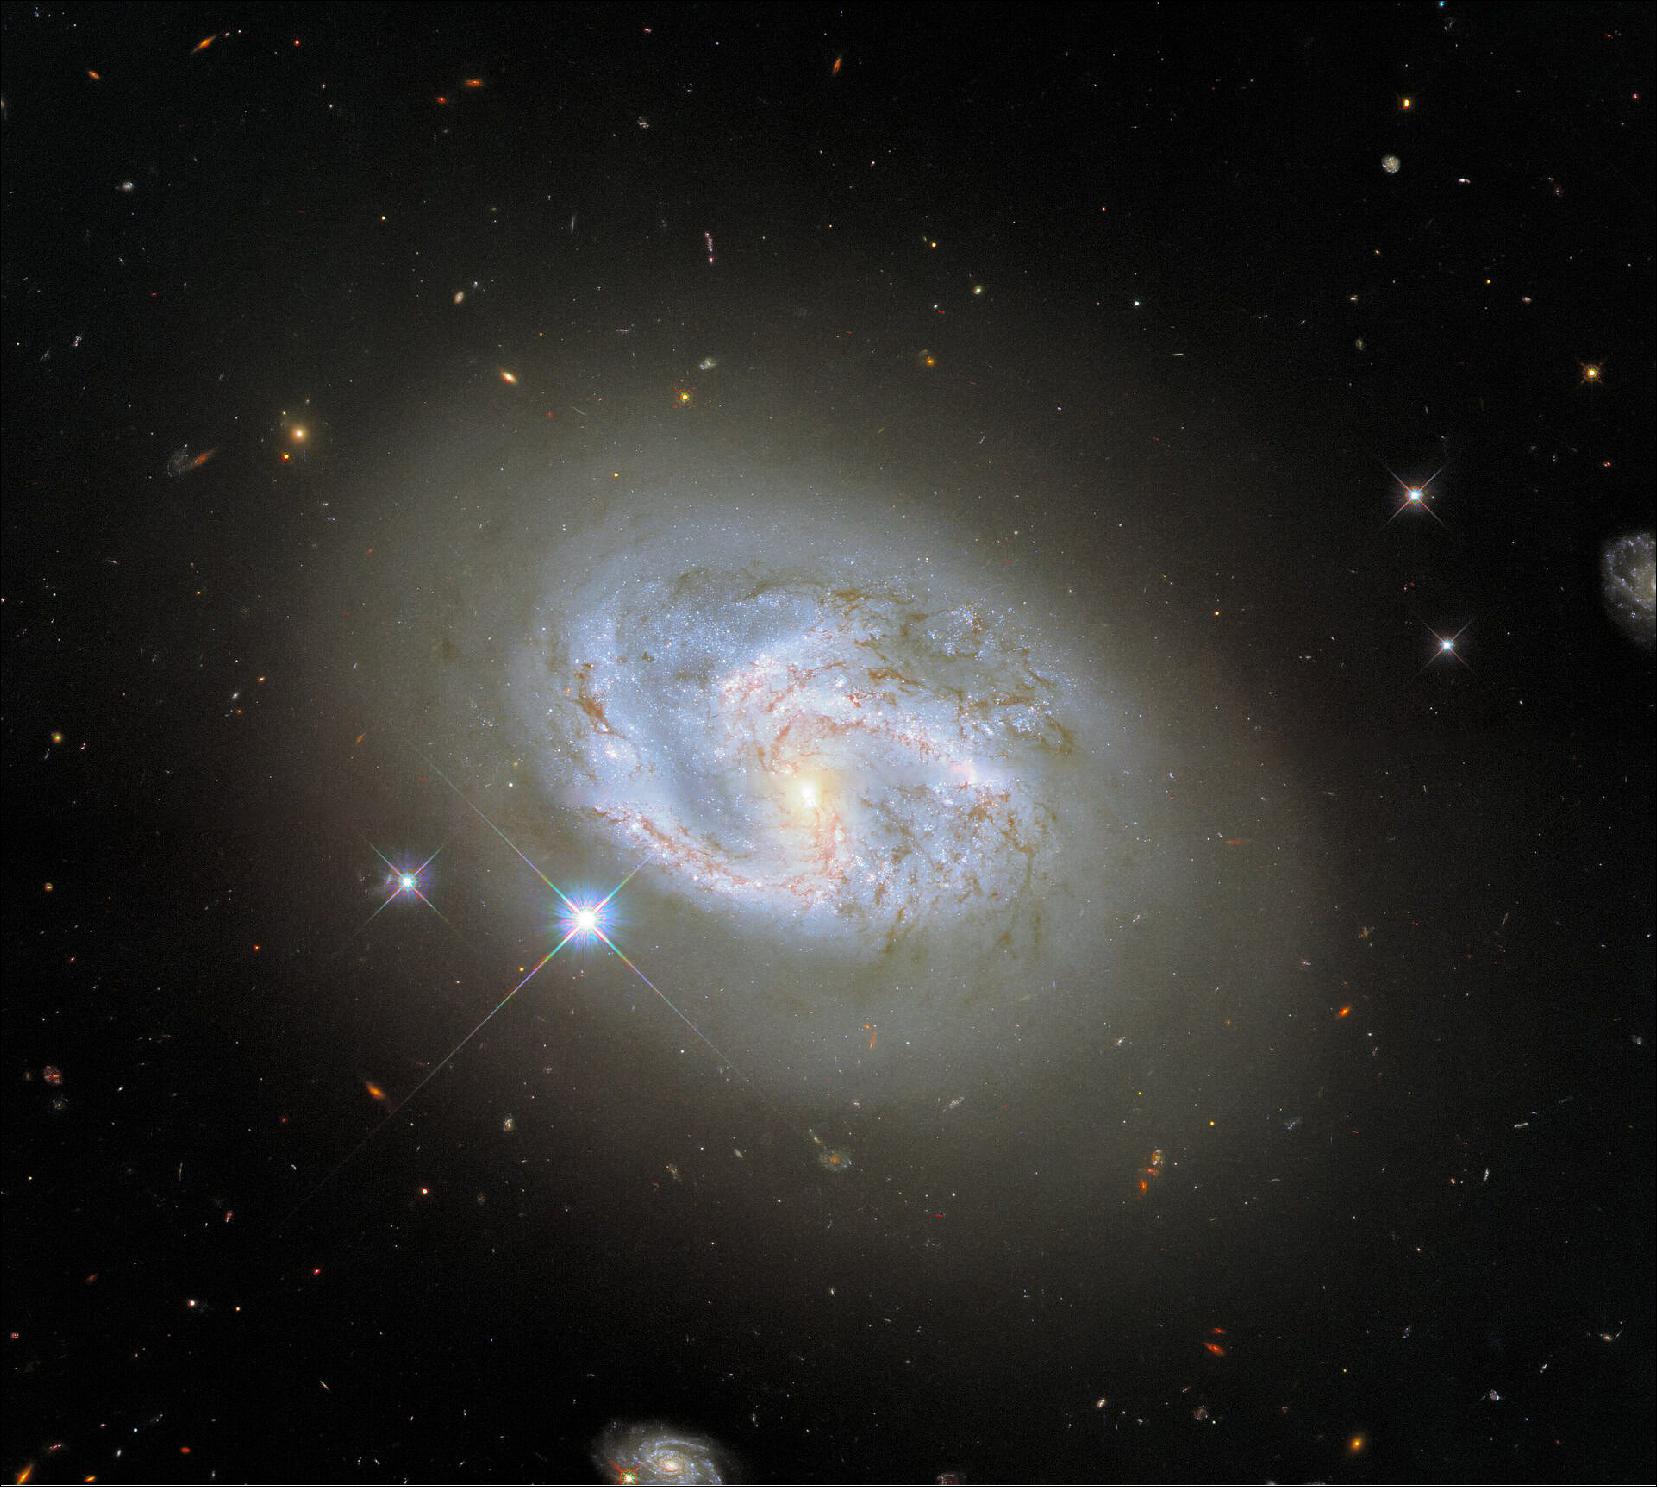 Figure 79: NGC 4680 is actually a rather tricky galaxy to classify. It is sometimes referred to as a spiral galaxy, but it is also sometimes classified as a lenticular galaxy. Lenticular galaxies fall somewhere in between spiral galaxies and elliptical galaxies. Whilst NGC 4680 does have distinguishable spiral arms, they are not clearly defined, and the tip of one arm appears very diffuse. Galaxies are not static, and their morphologies (and therefore their classifications) vary throughout their lifetimes. Spiral galaxies are thought to evolve into elliptical galaxies, most likely by merging with one another, causing them to lose their distinctive spiral structures (image credit: ESA/Hubble & NASA, A. Riess et al.; CC BY 4.0)